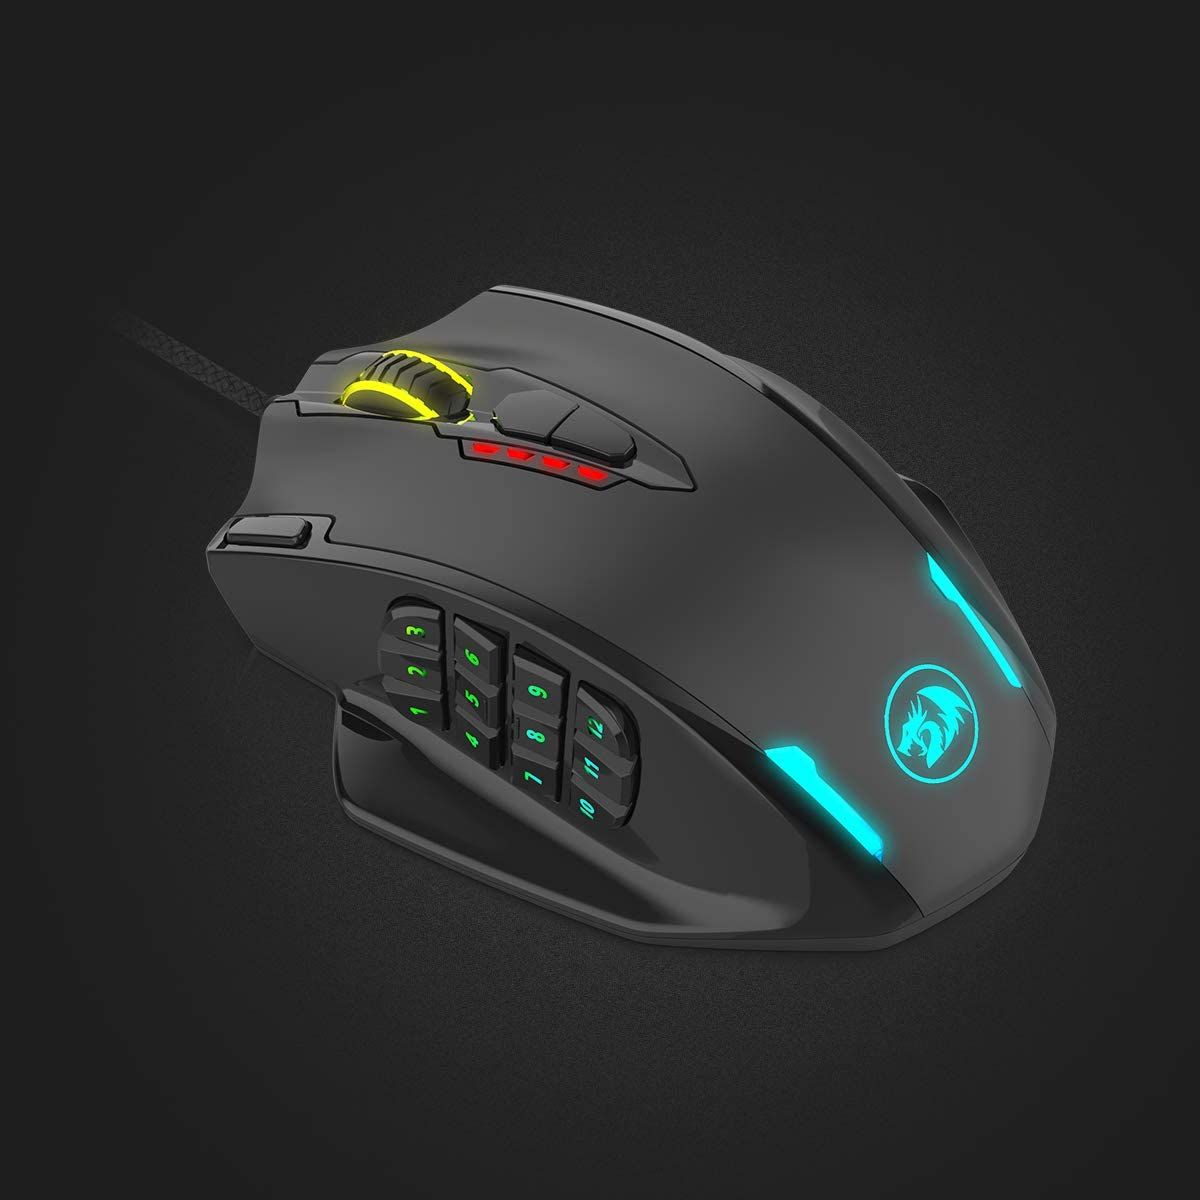 drag clicking mouse under 30